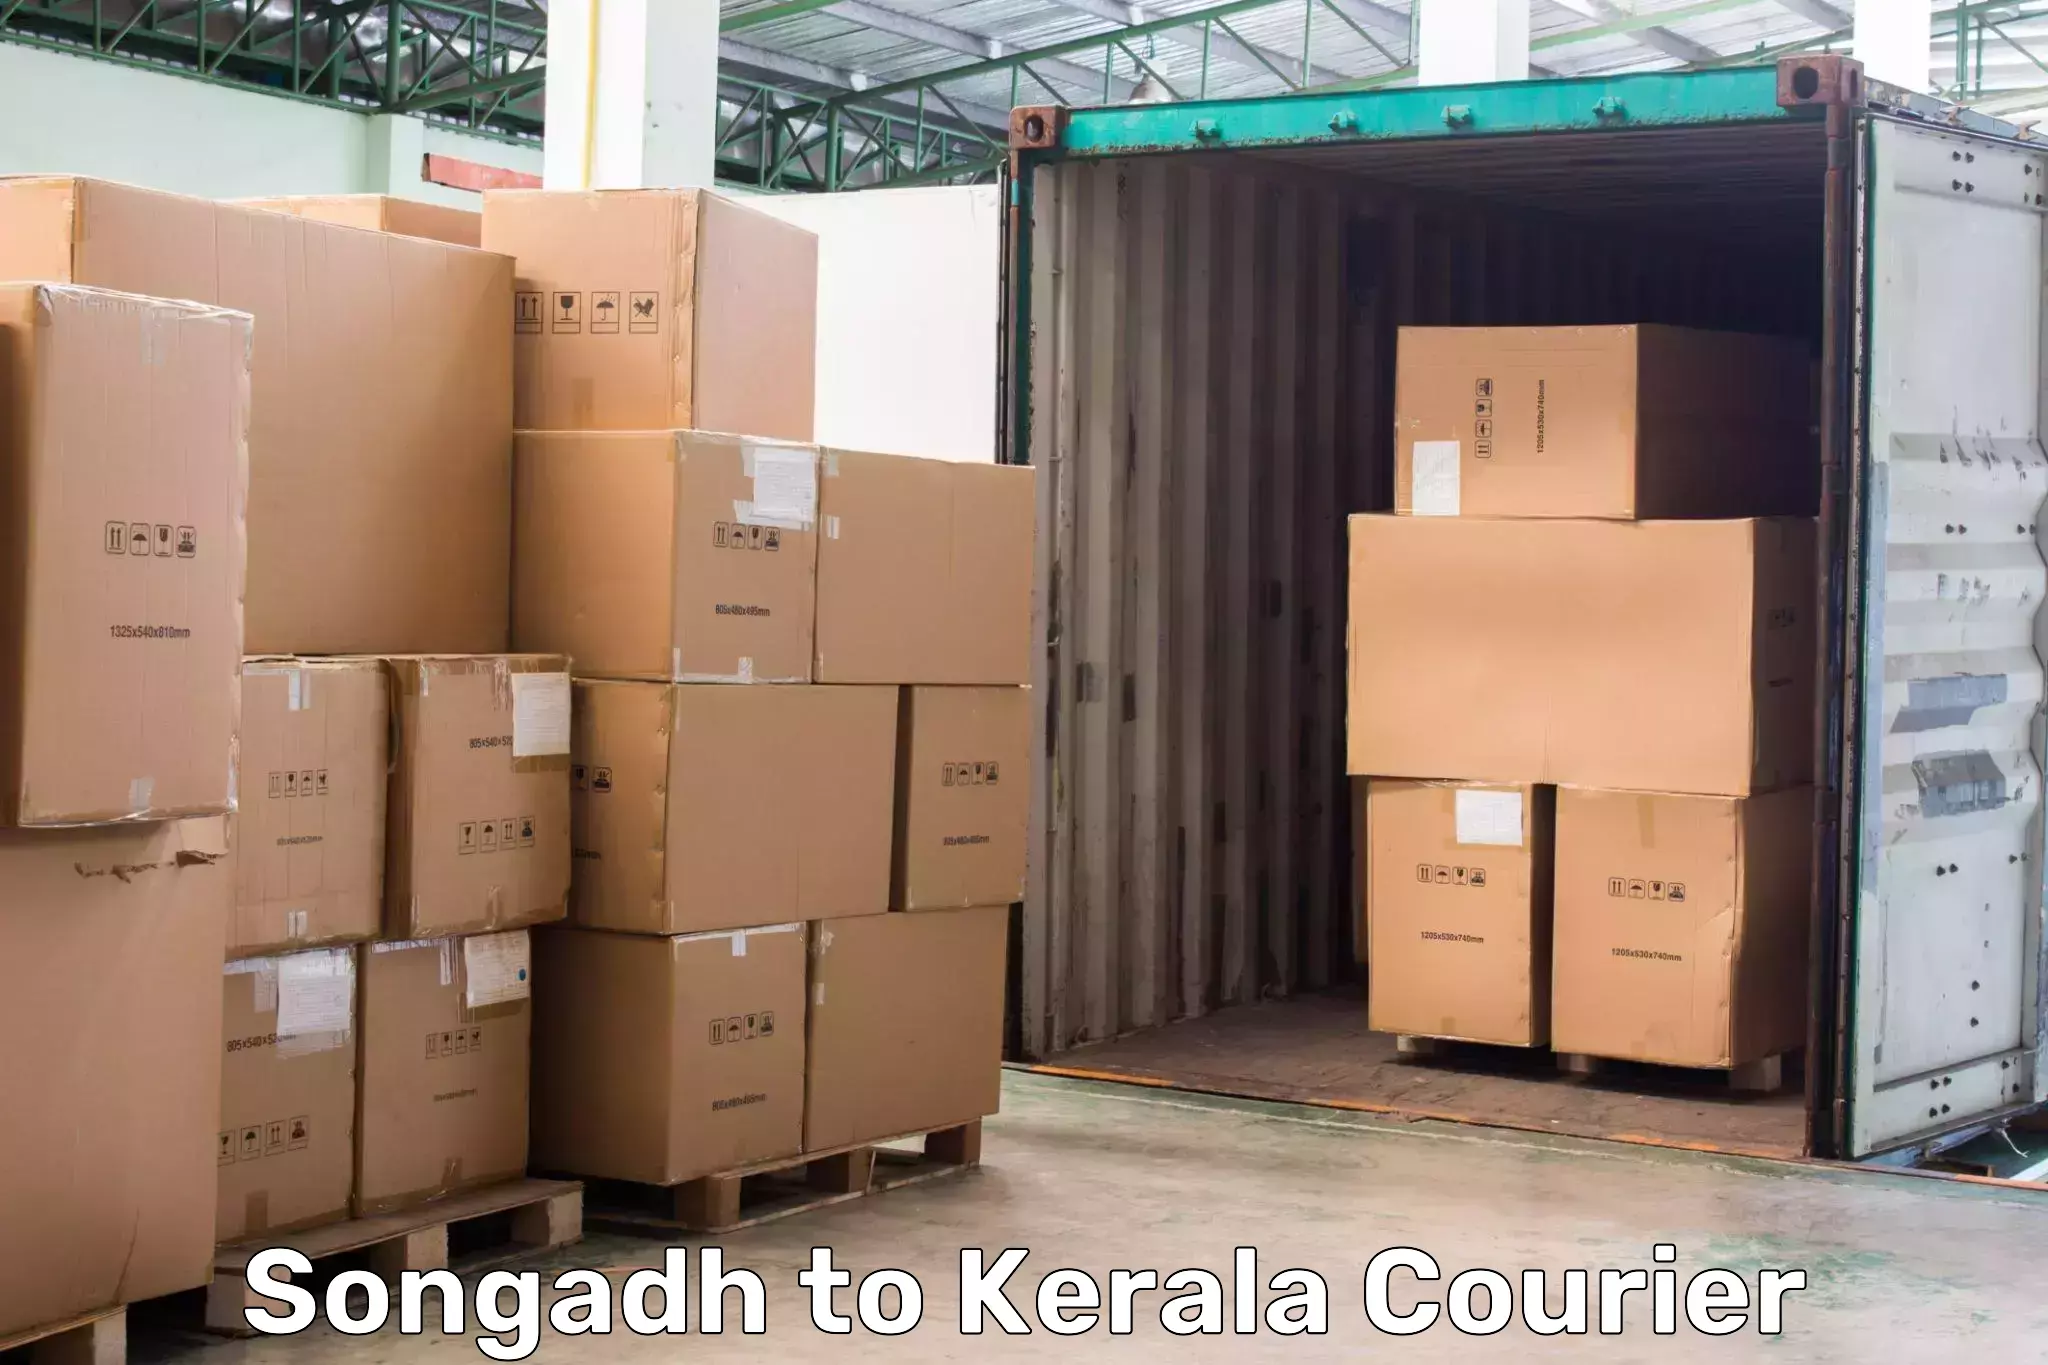 Next day courier Songadh to Kochi